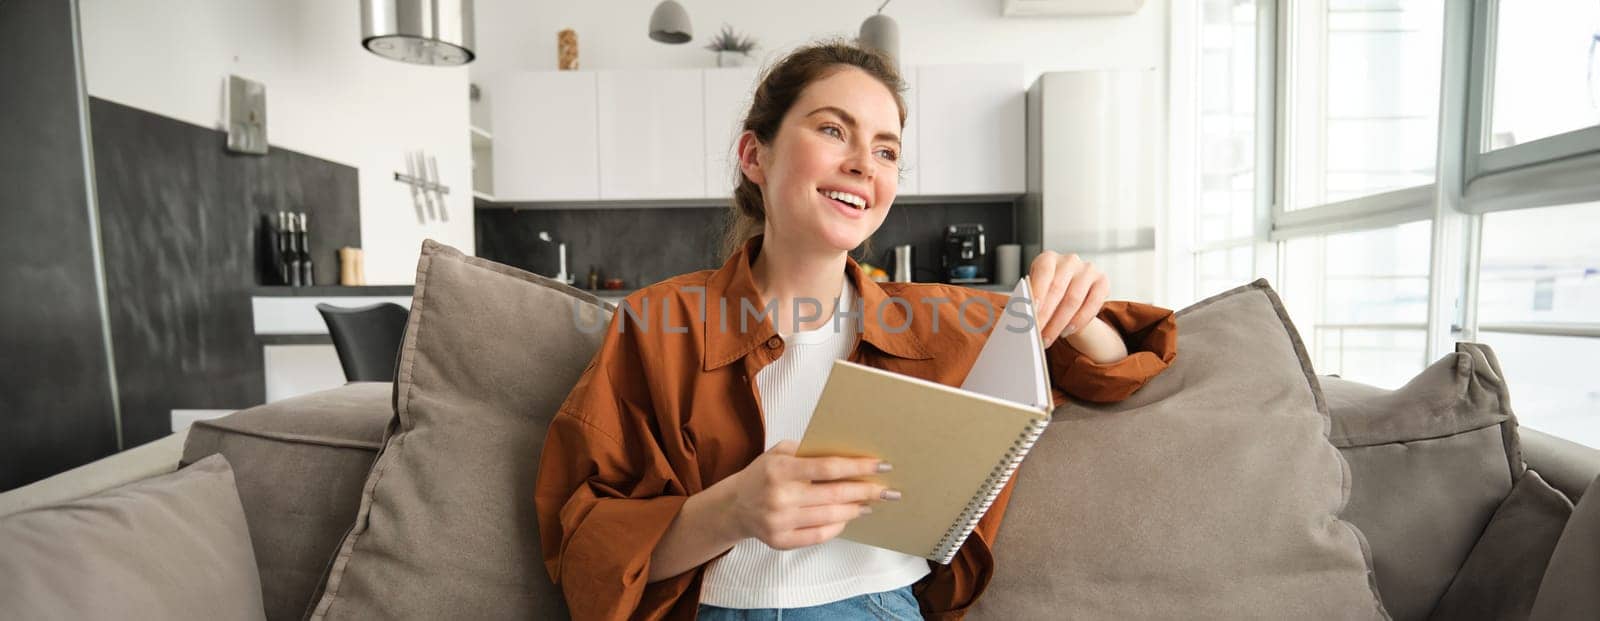 Portrait of young smiling beautiful woman, sitting on sofa in her living room, holding study material, doing homework, reading notes in notebook.